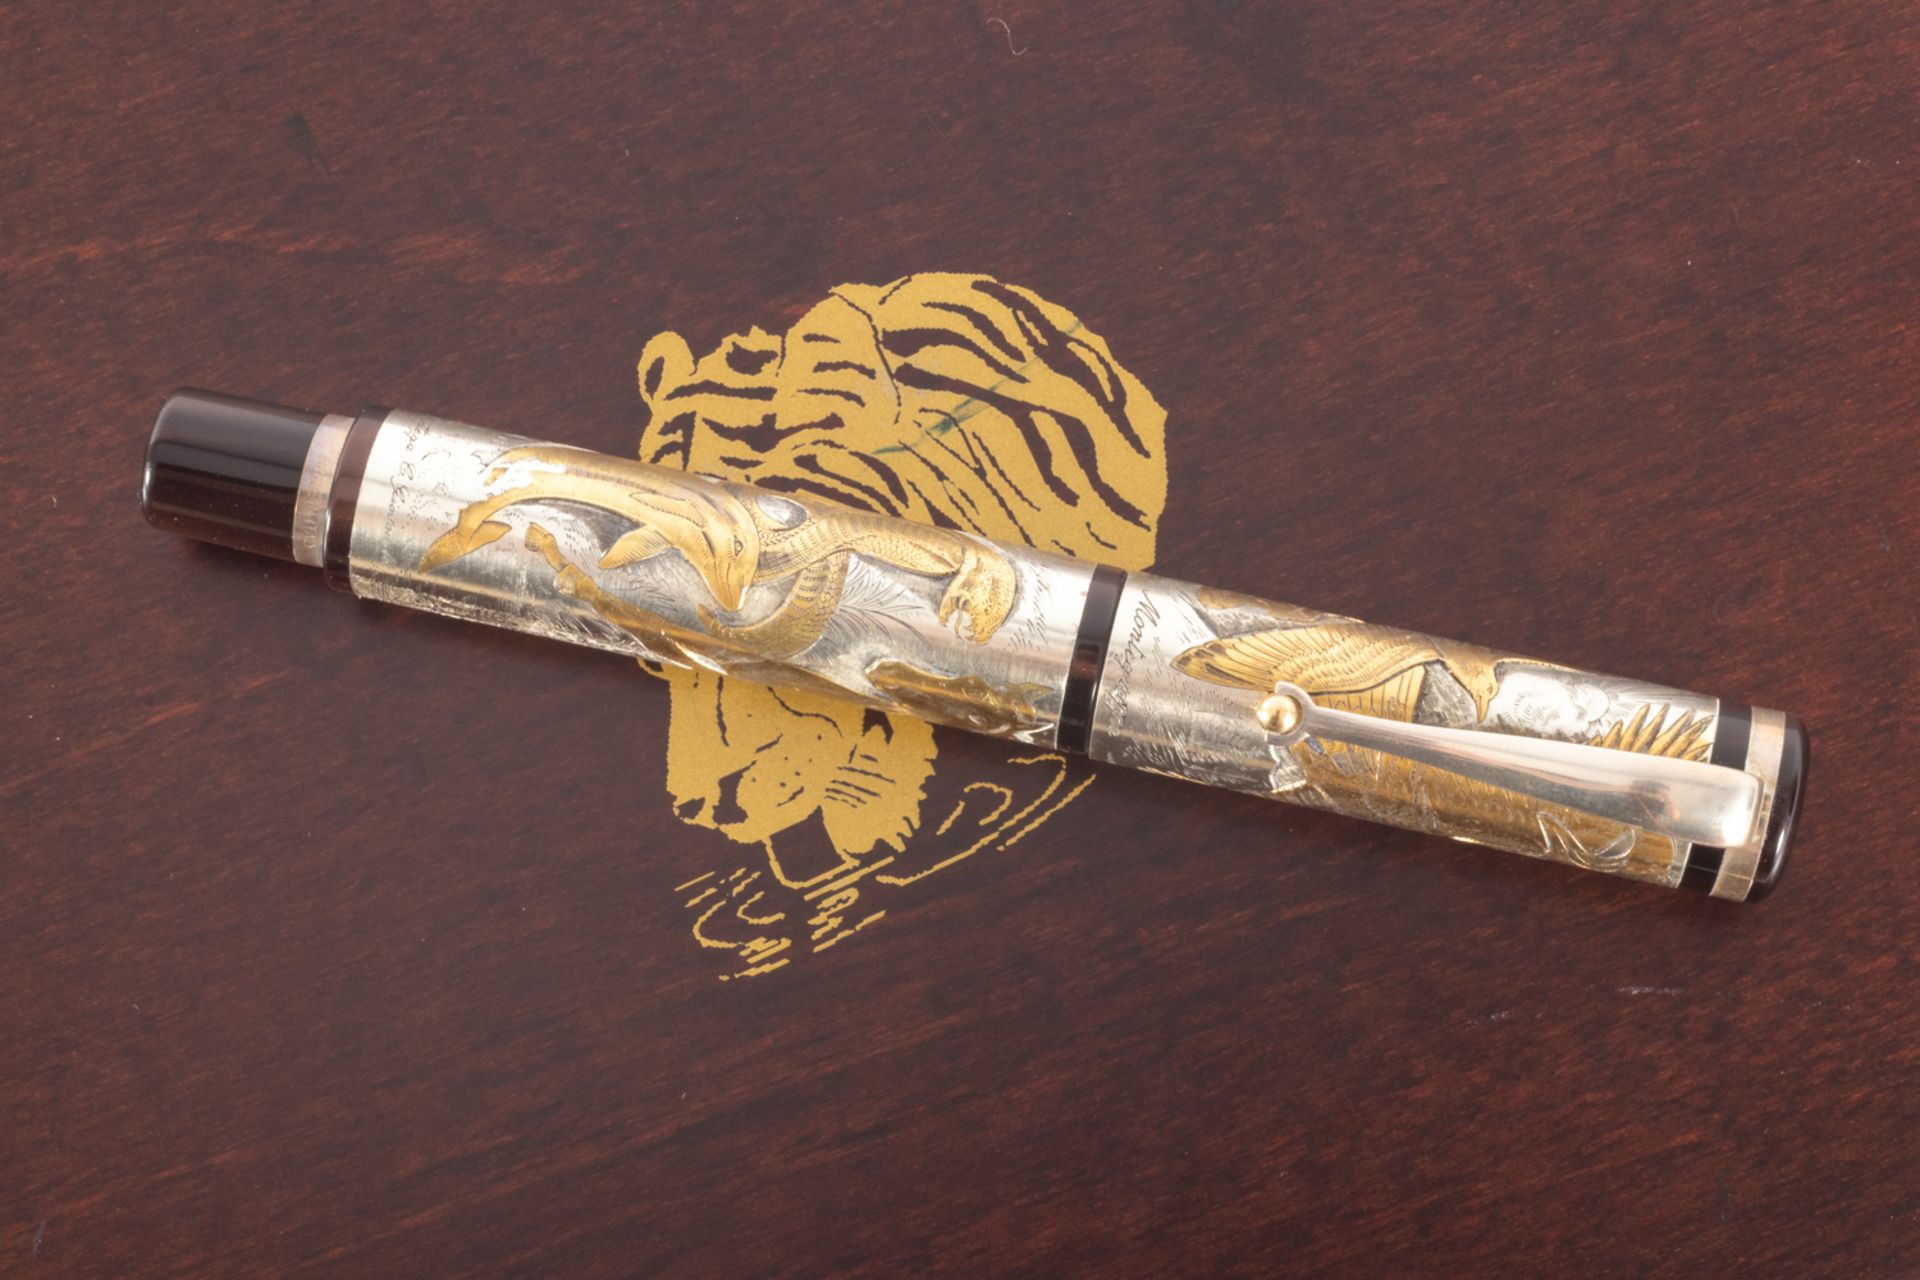 Montegrappa fountain pen "Animalia for Peace Park Foundation" collection, 2000. Limited edition numb - Bild 2 aus 3